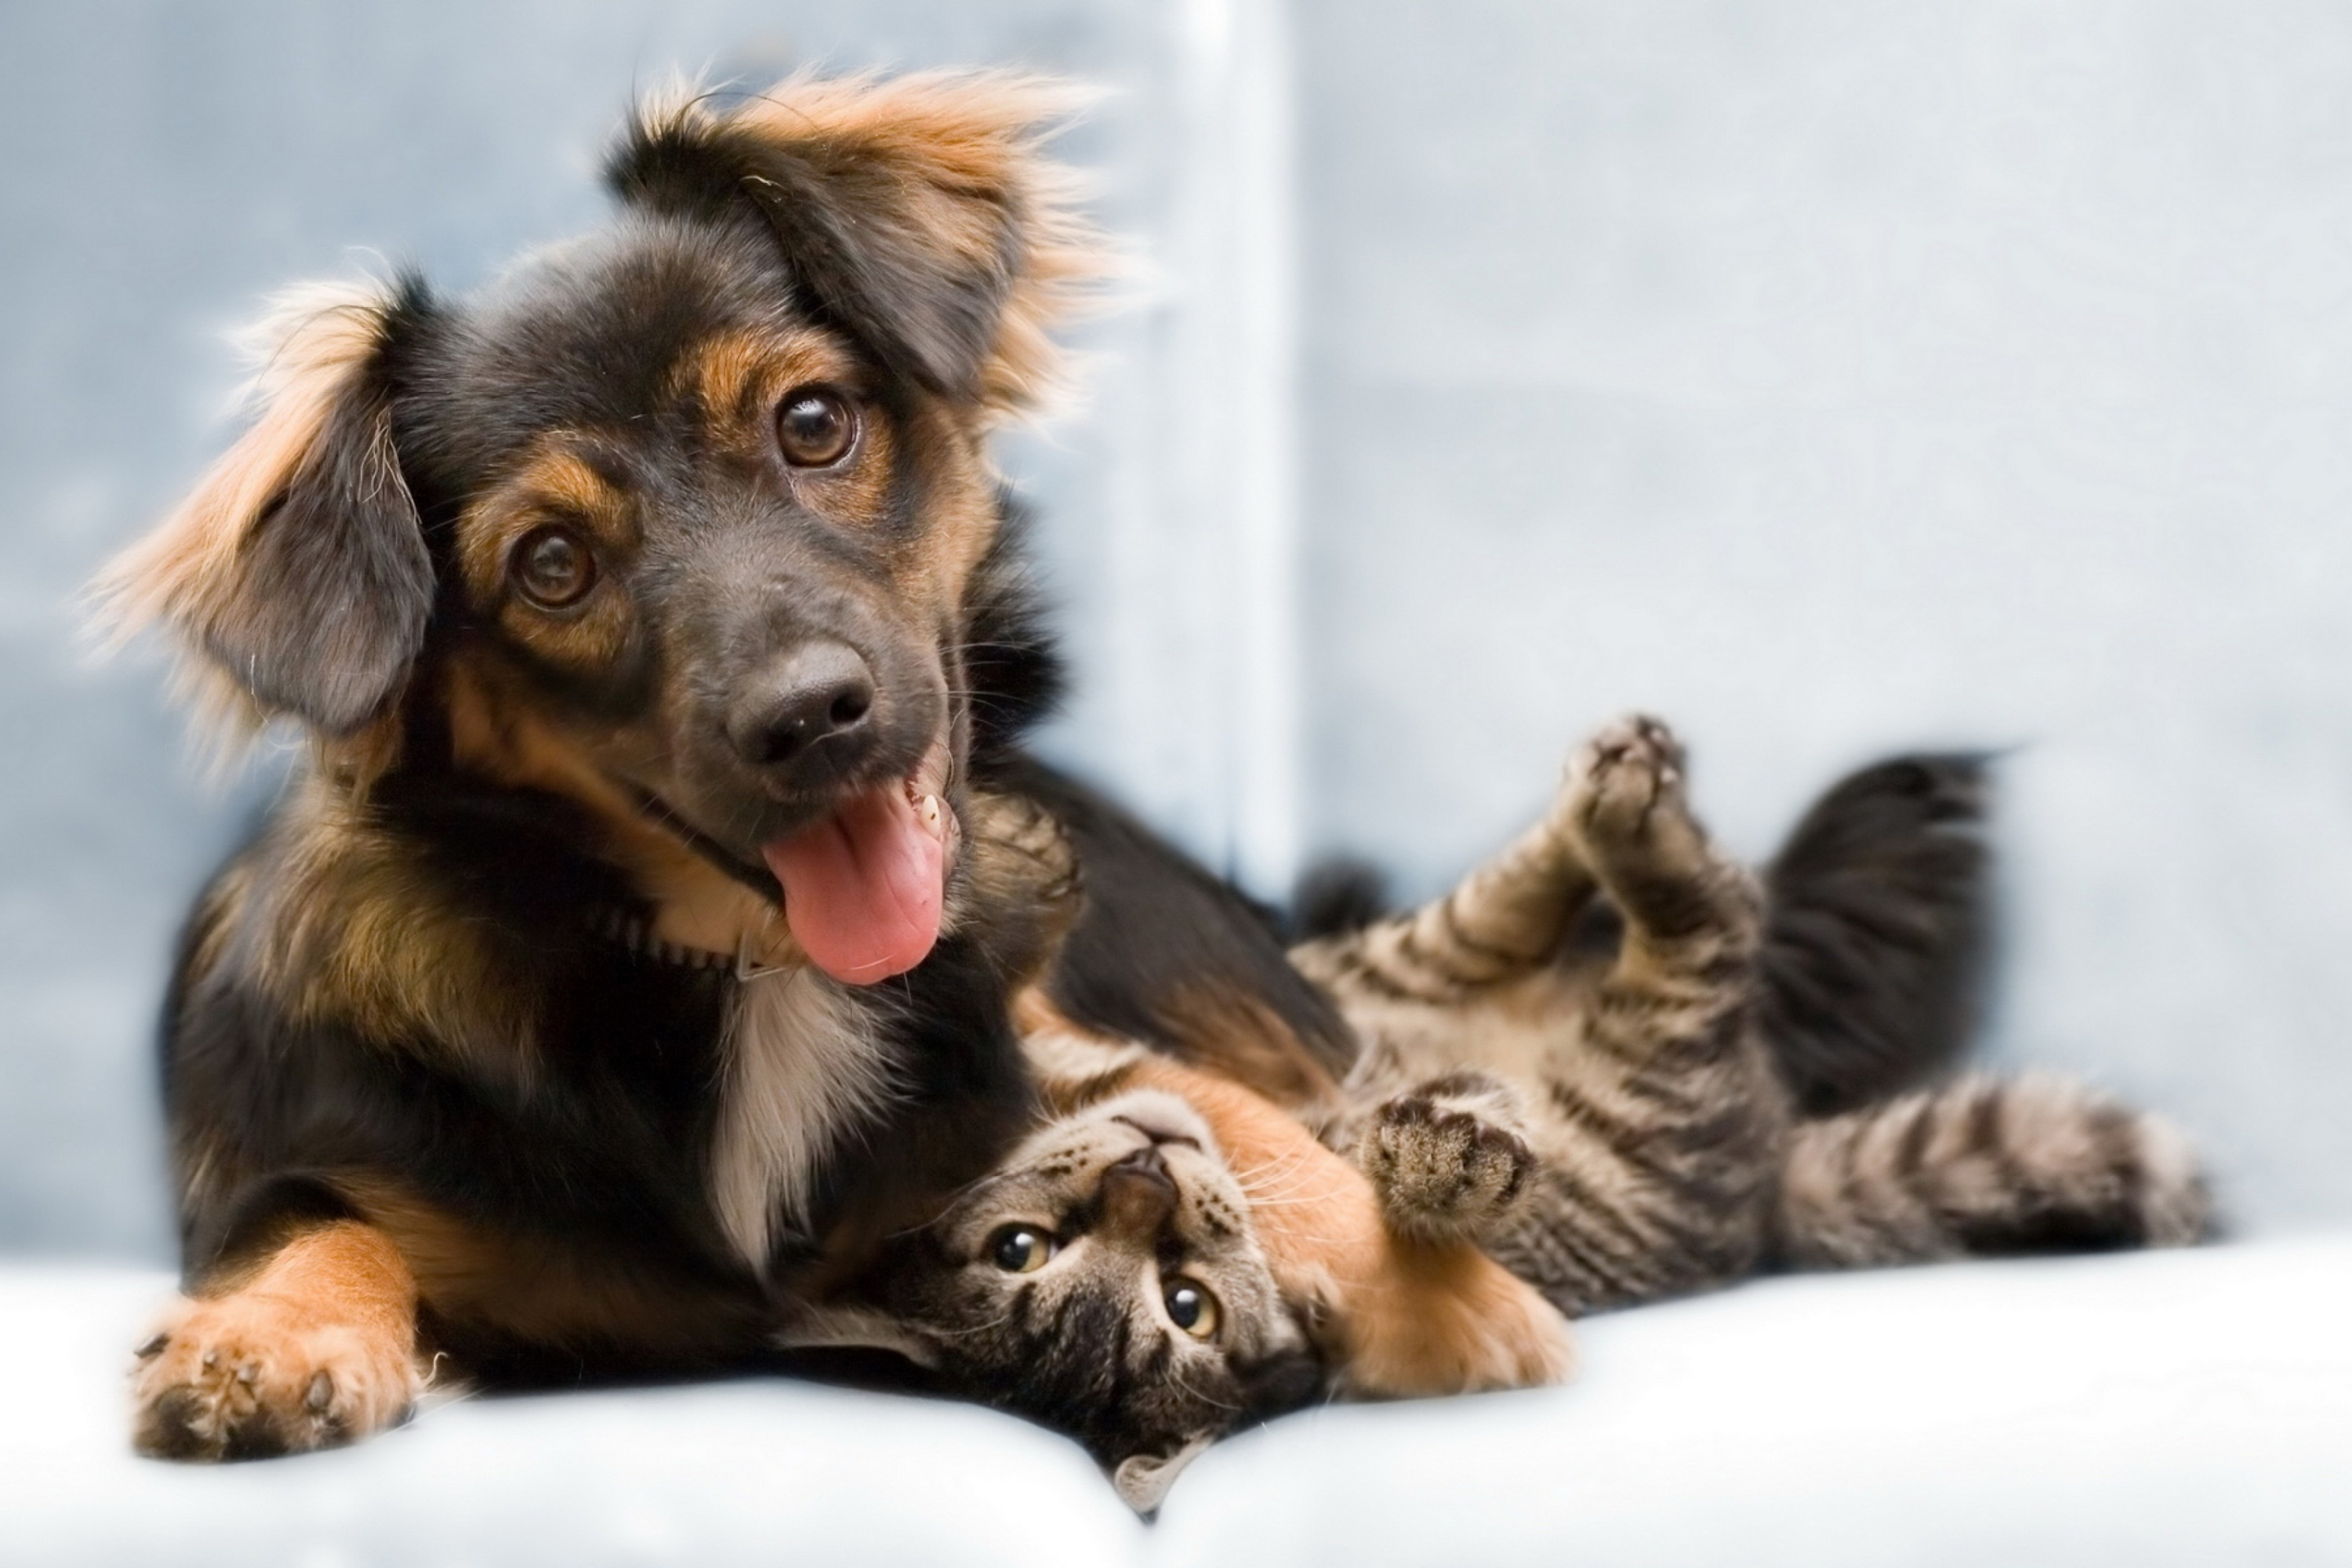 Dog and Cat wallpaper 2880x1920